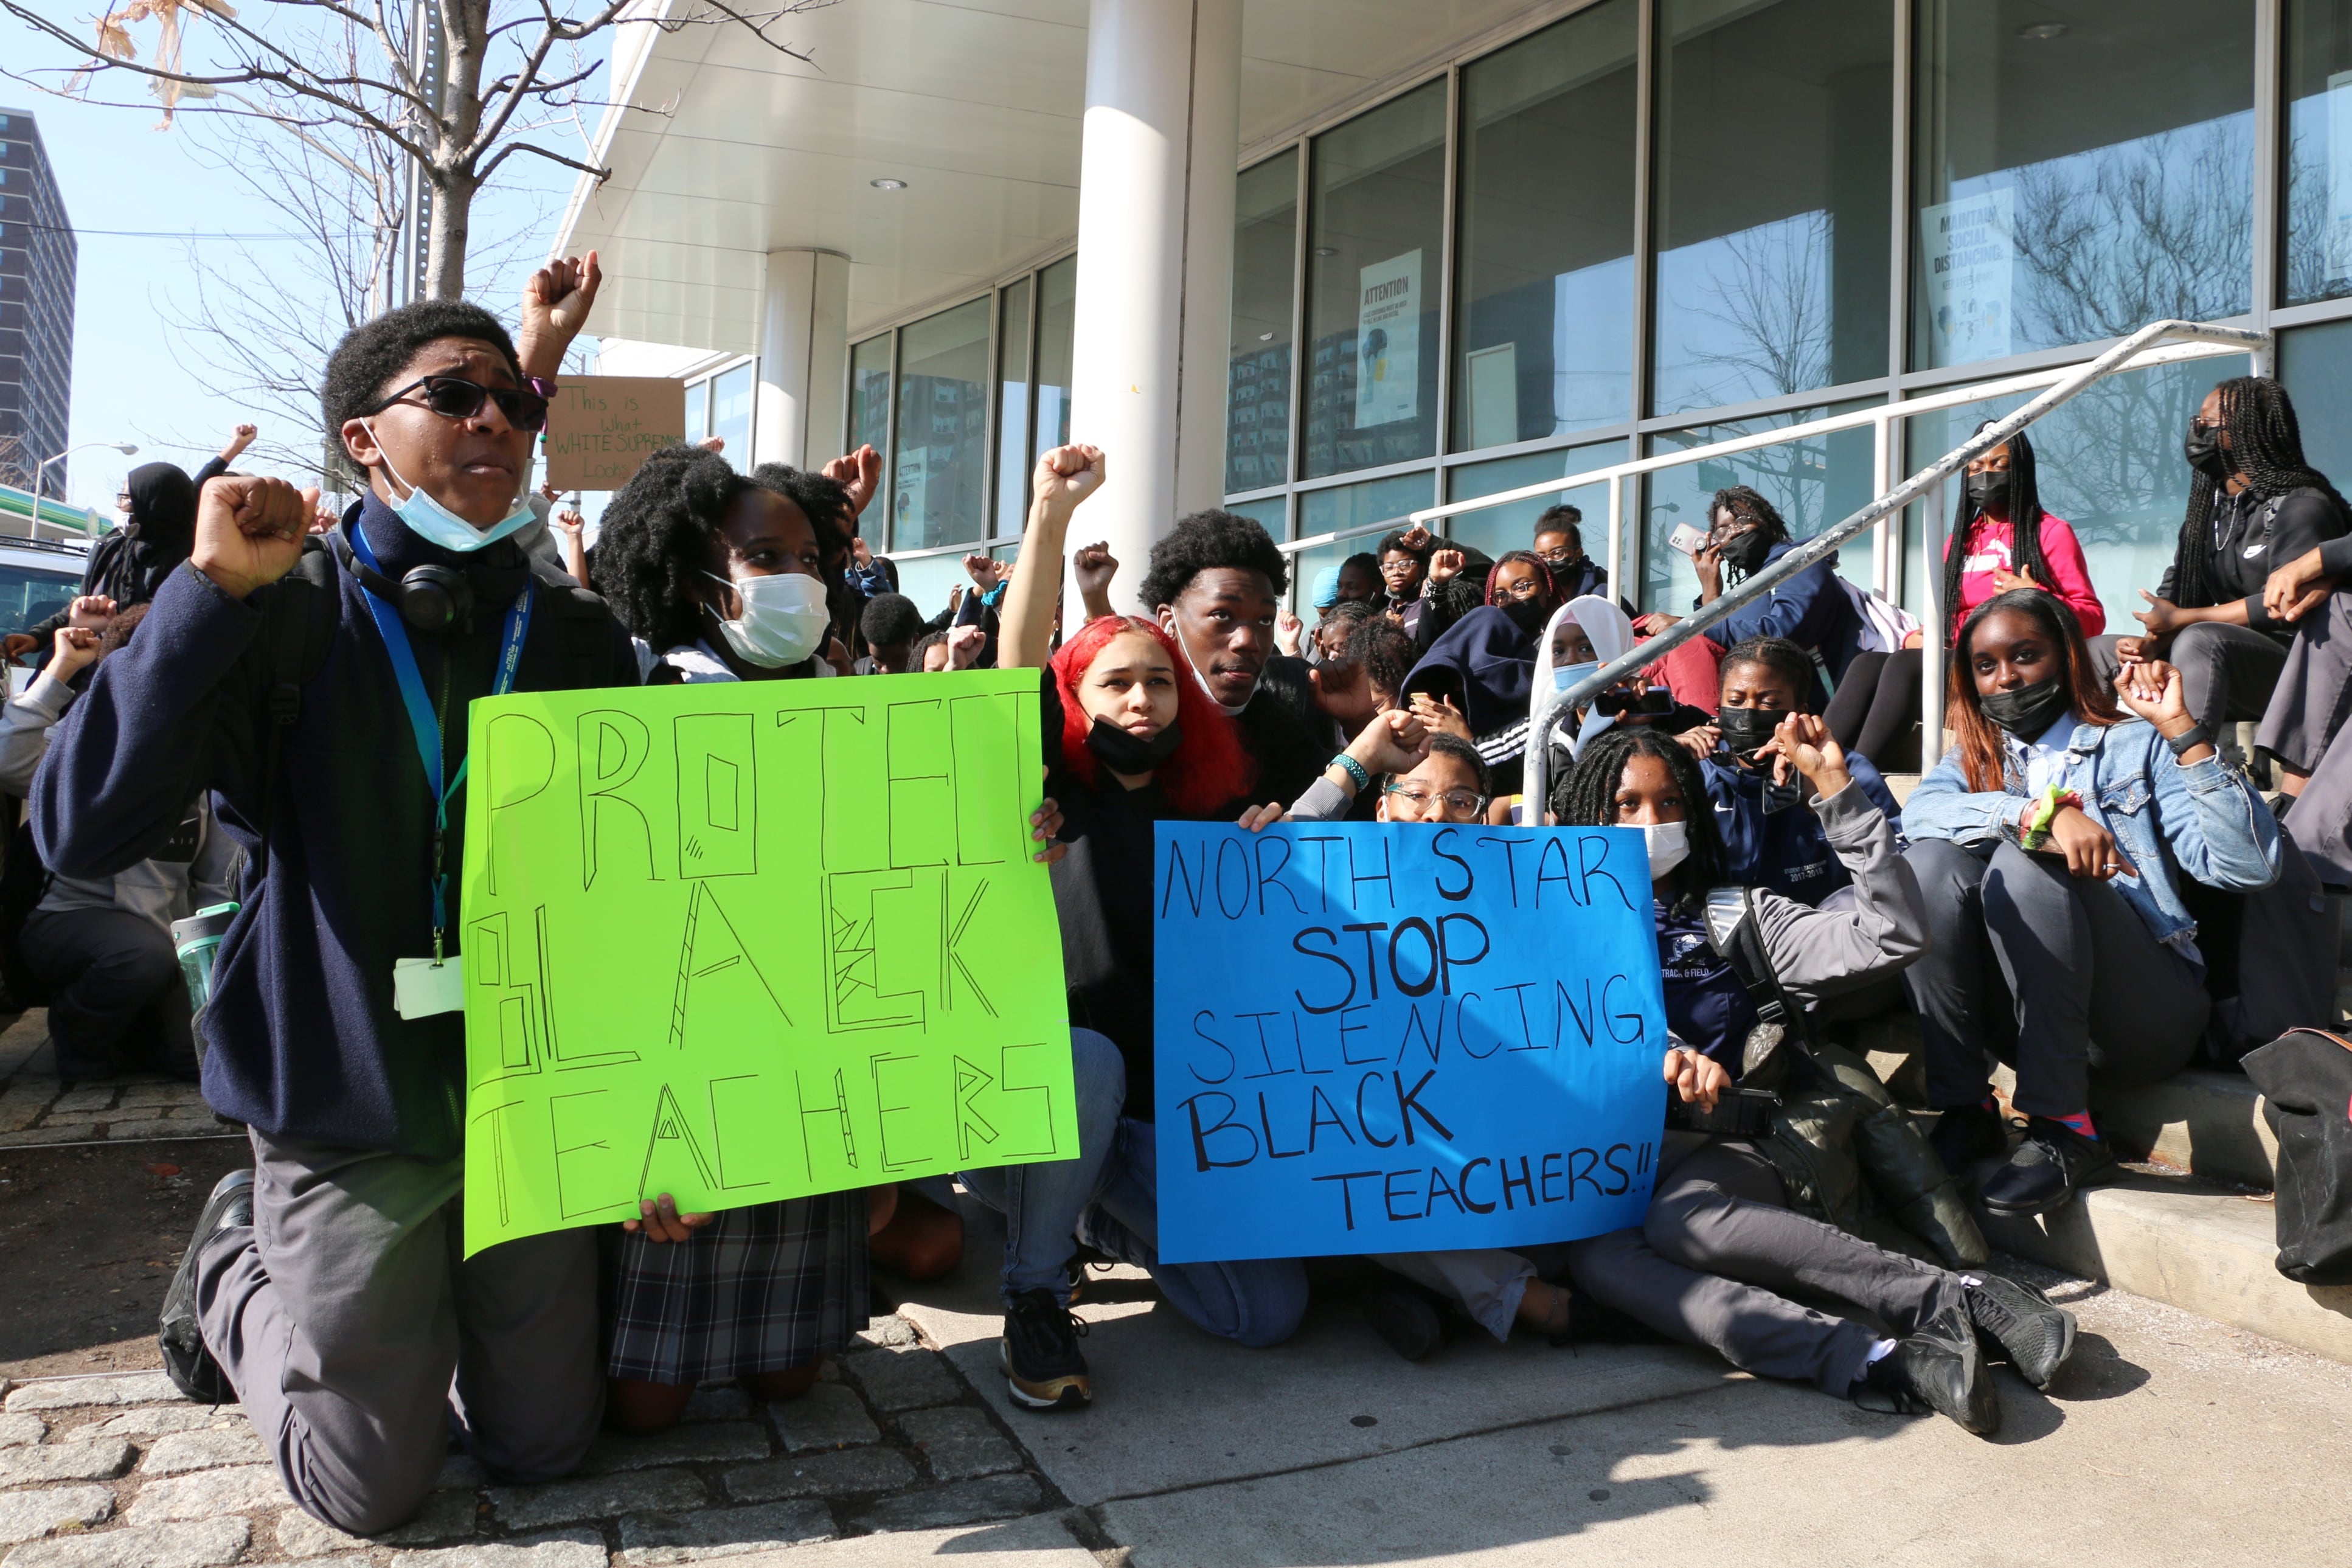 Students kneel, raise their fists, and hold up signs in a protest outside of North Star Academy in Newark.